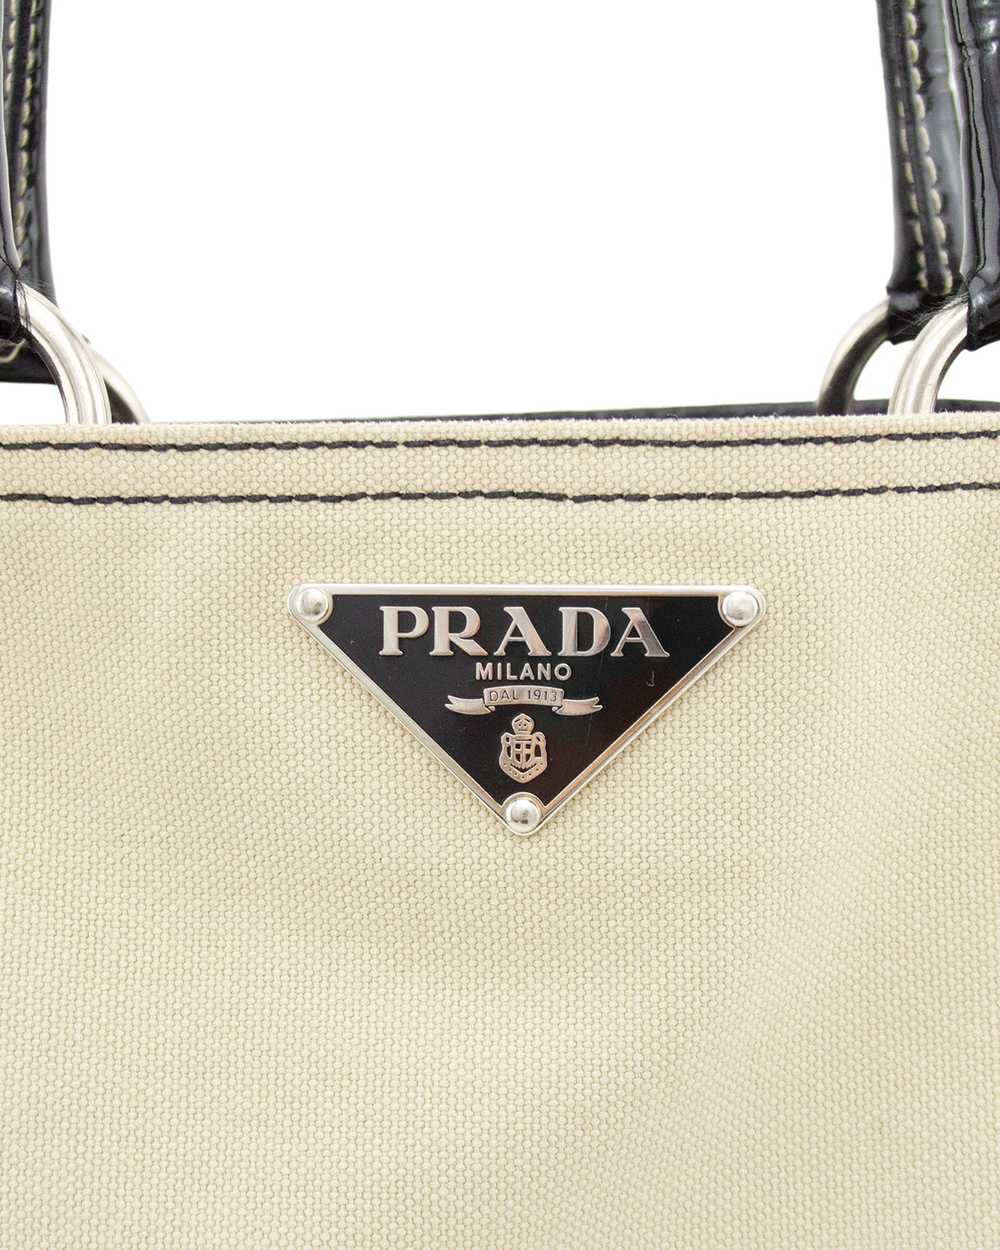 Prada Beige Canvas Tote with Black Patent Leather - image 4